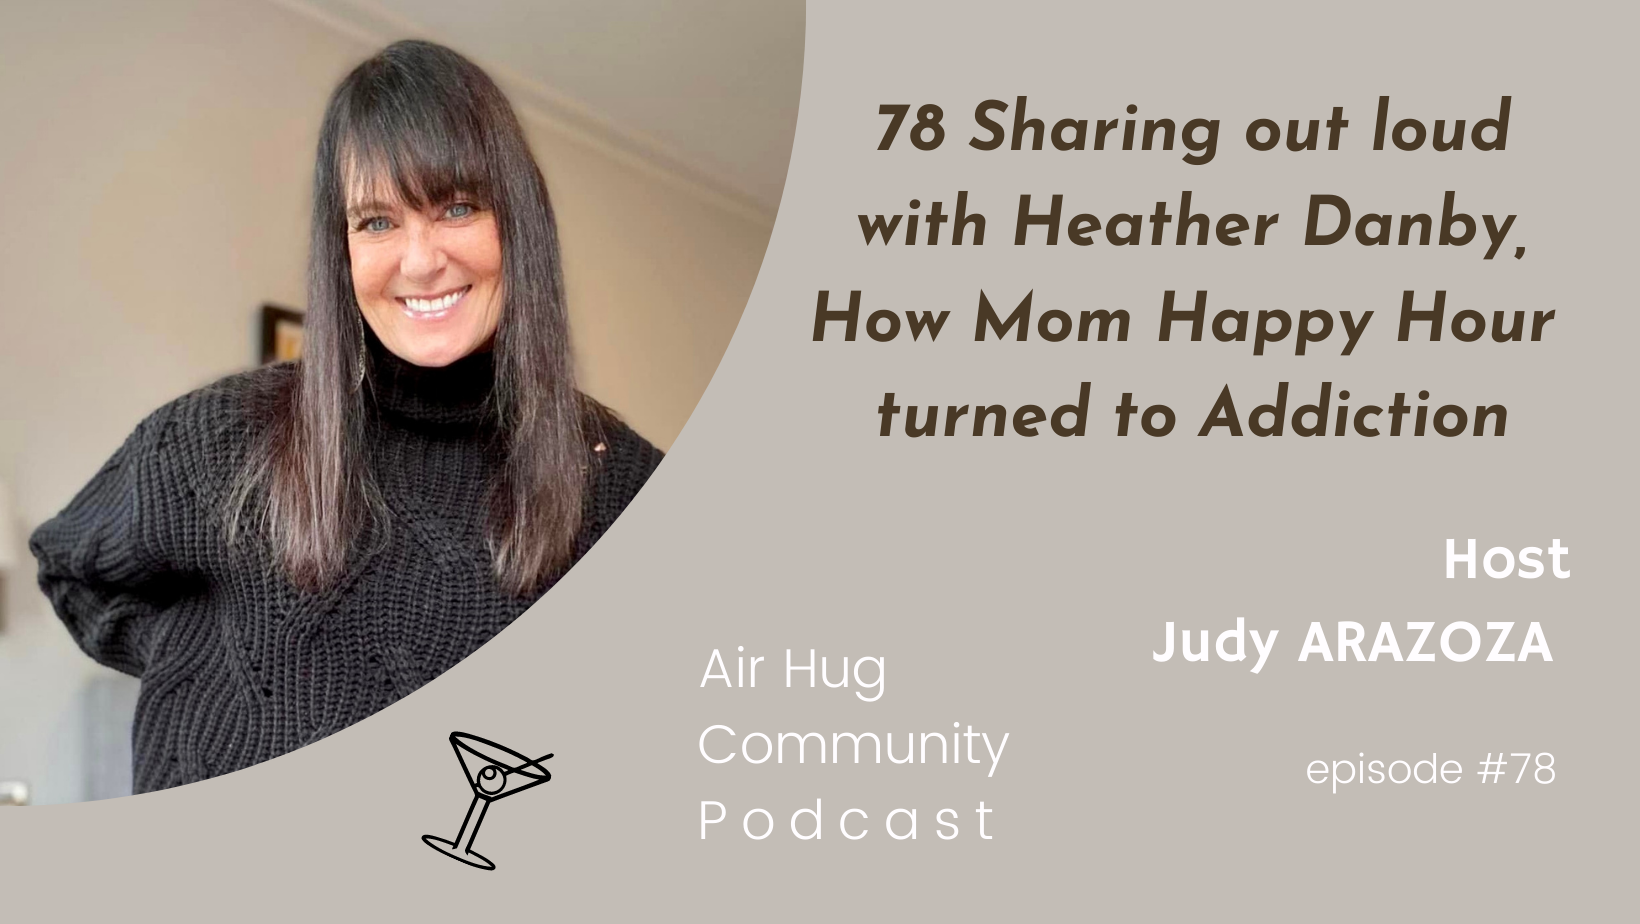 Featured image for “Episode 78:  Sharing out loud with Heather Danby, Her story of How Mom Happy Hour turned to Addiction”